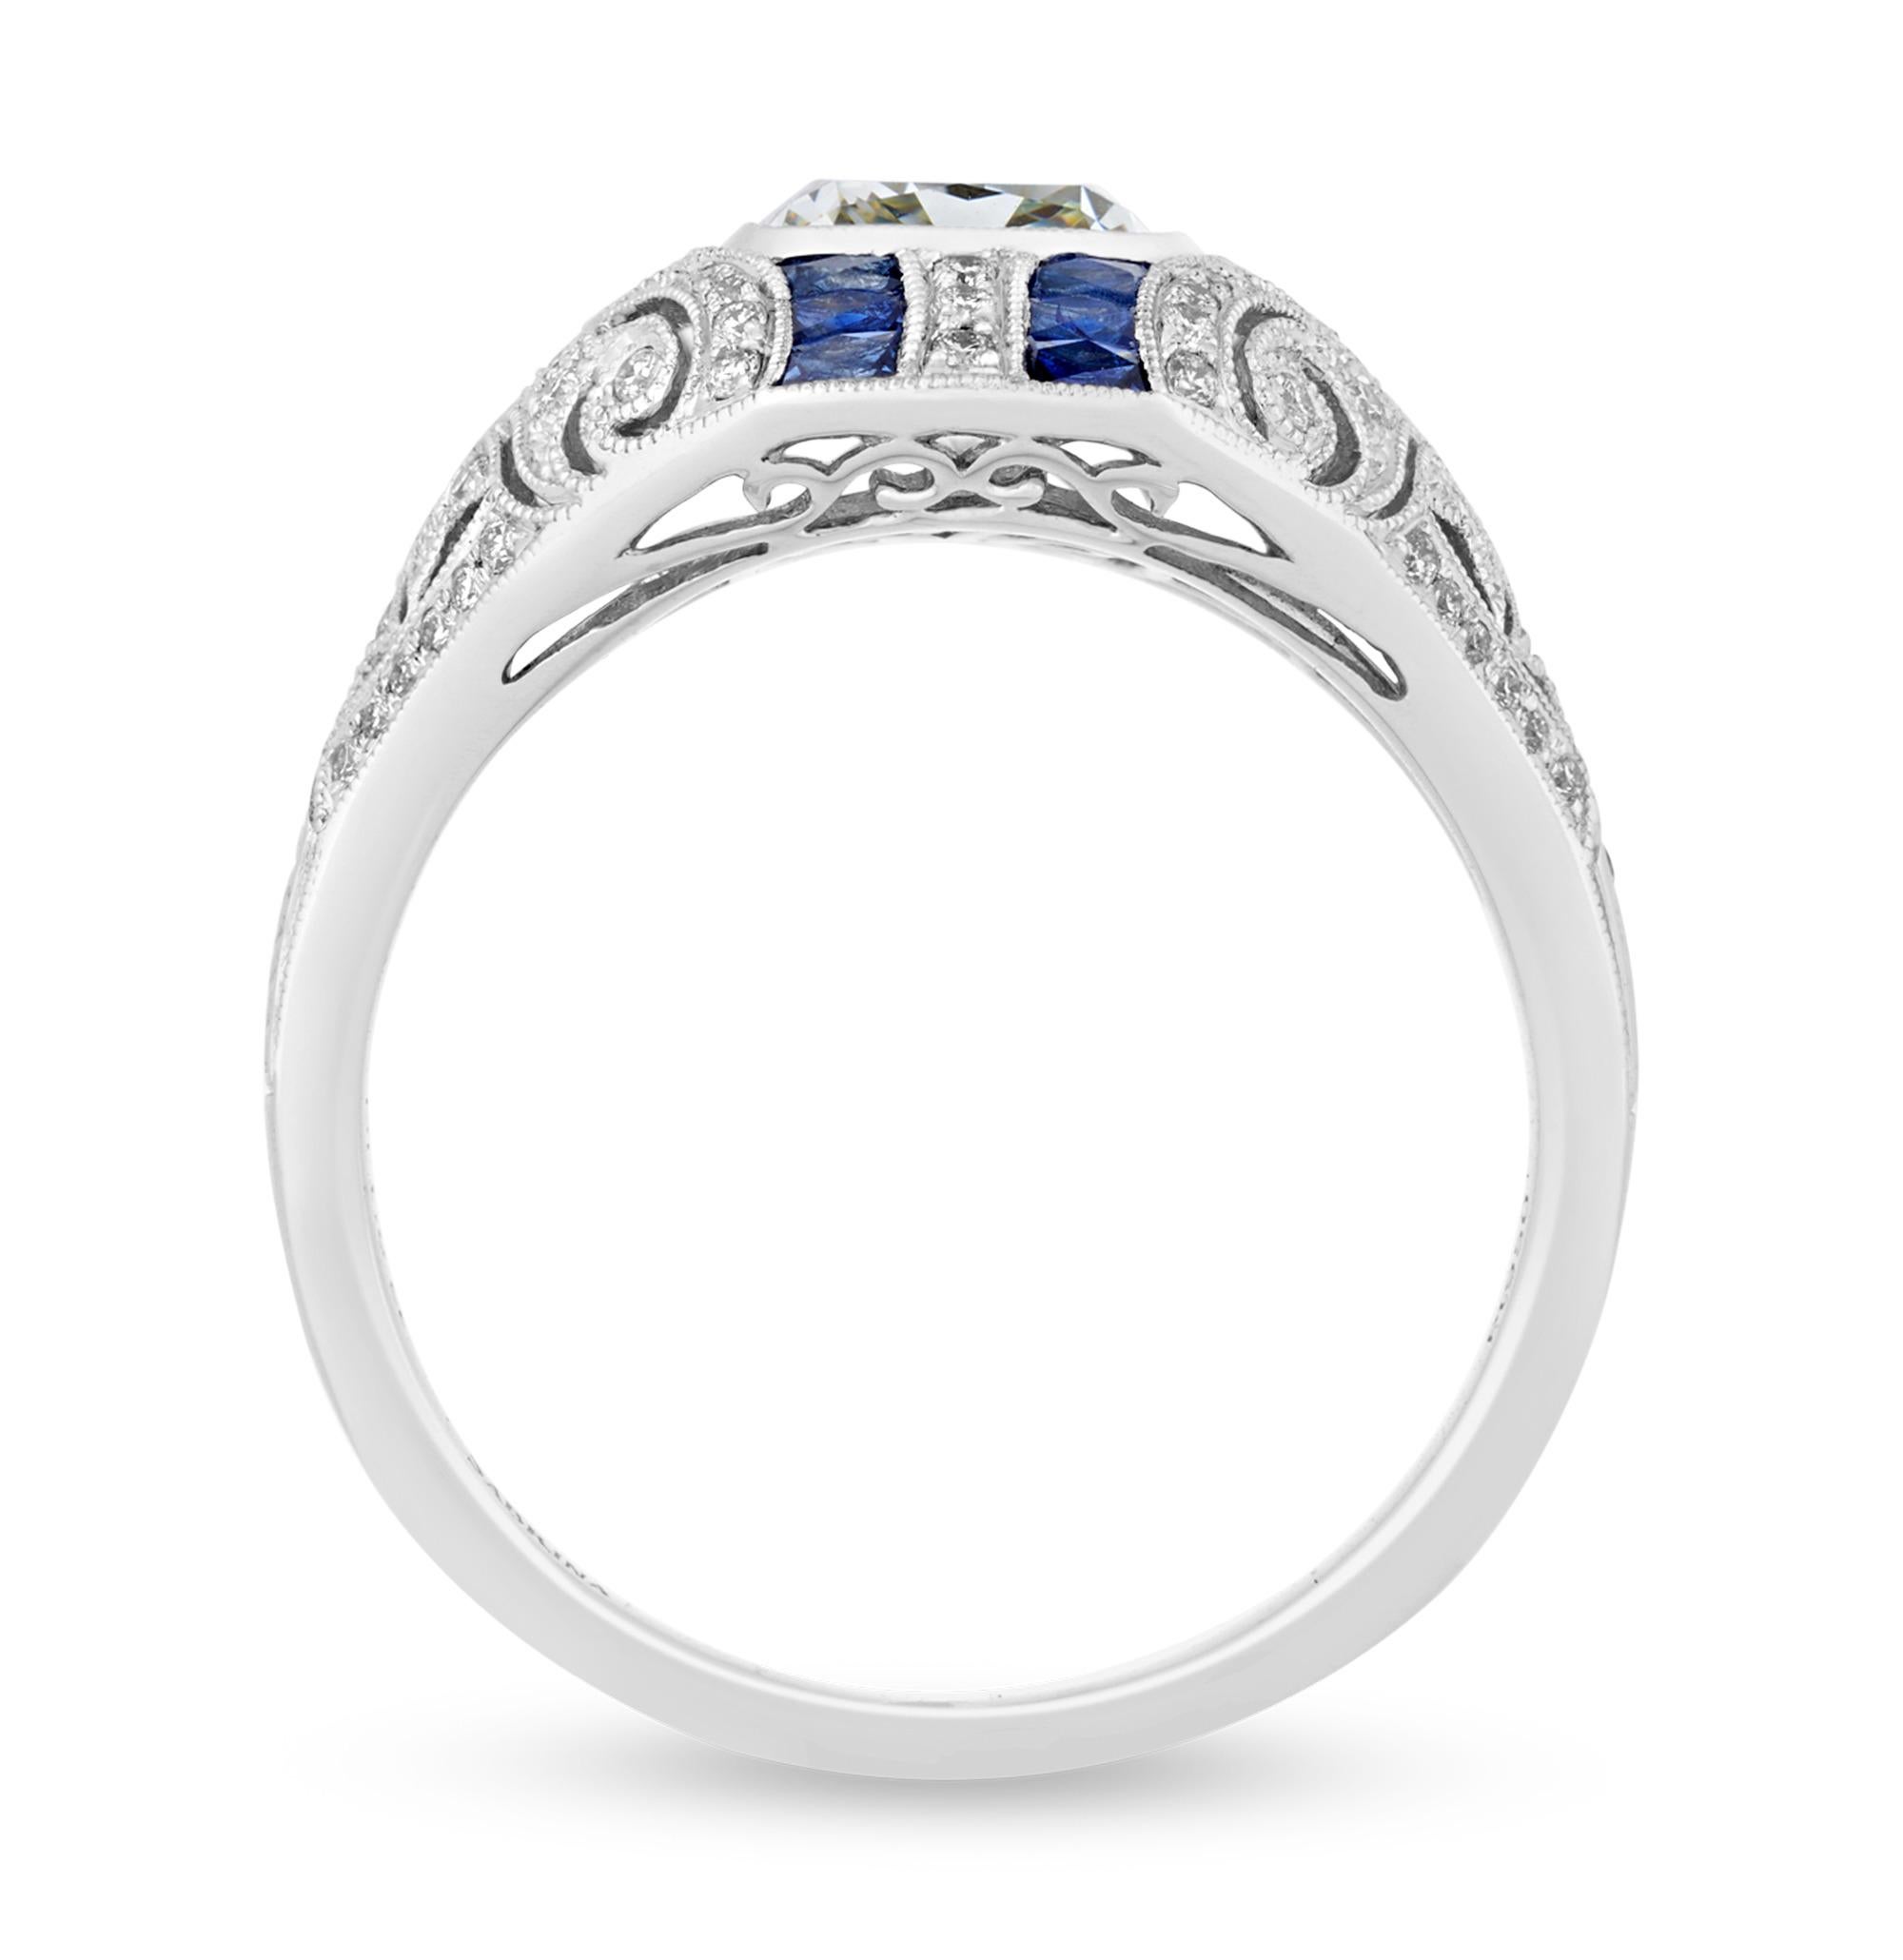 This captivating cushion-cut diamond ring, featuring a 1.60-carat center stone, perfectly embodies elegance and sophistication. Framed by sapphires in a bold north-south design, this piece is further enhanced by intricate filigree work along its